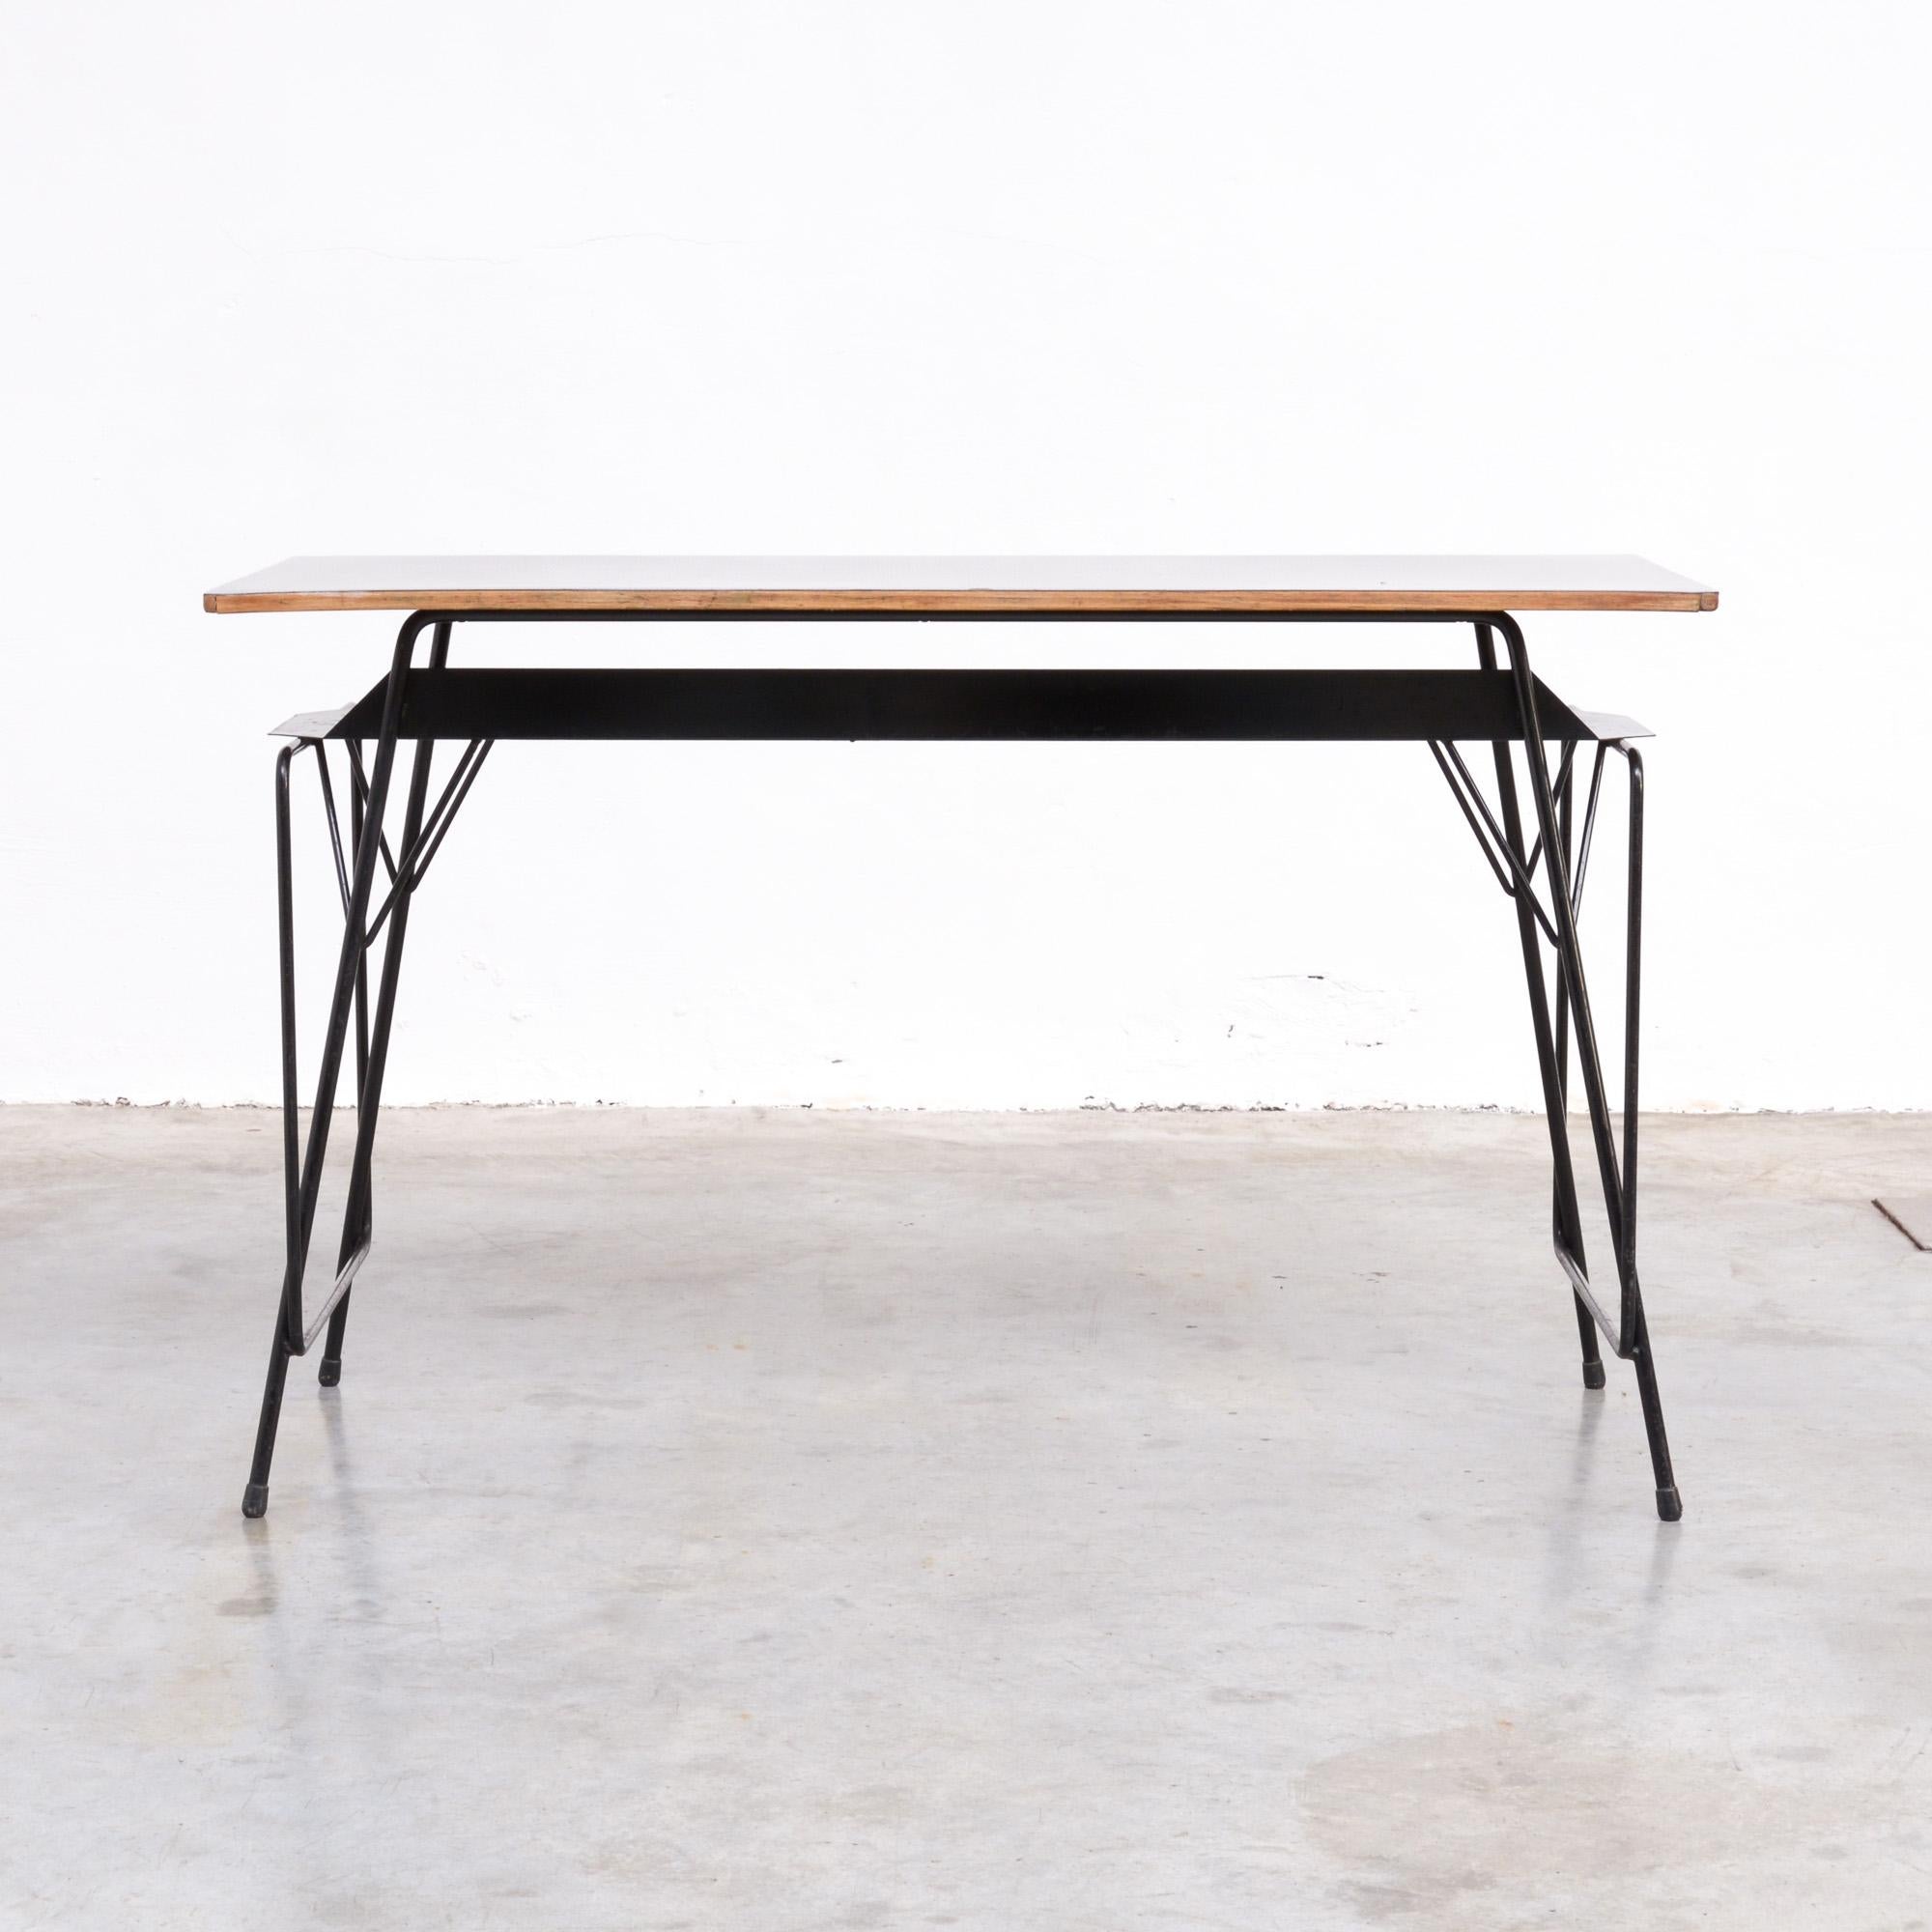 This beautiful desk was designed by Willy Van Der Meeren in the early 1950s and manufactured by Tubax.
Van Der Meeren designed this kind of desks for schools.
The black lacquered metal frame is sophisticated made. The top in natural wood is